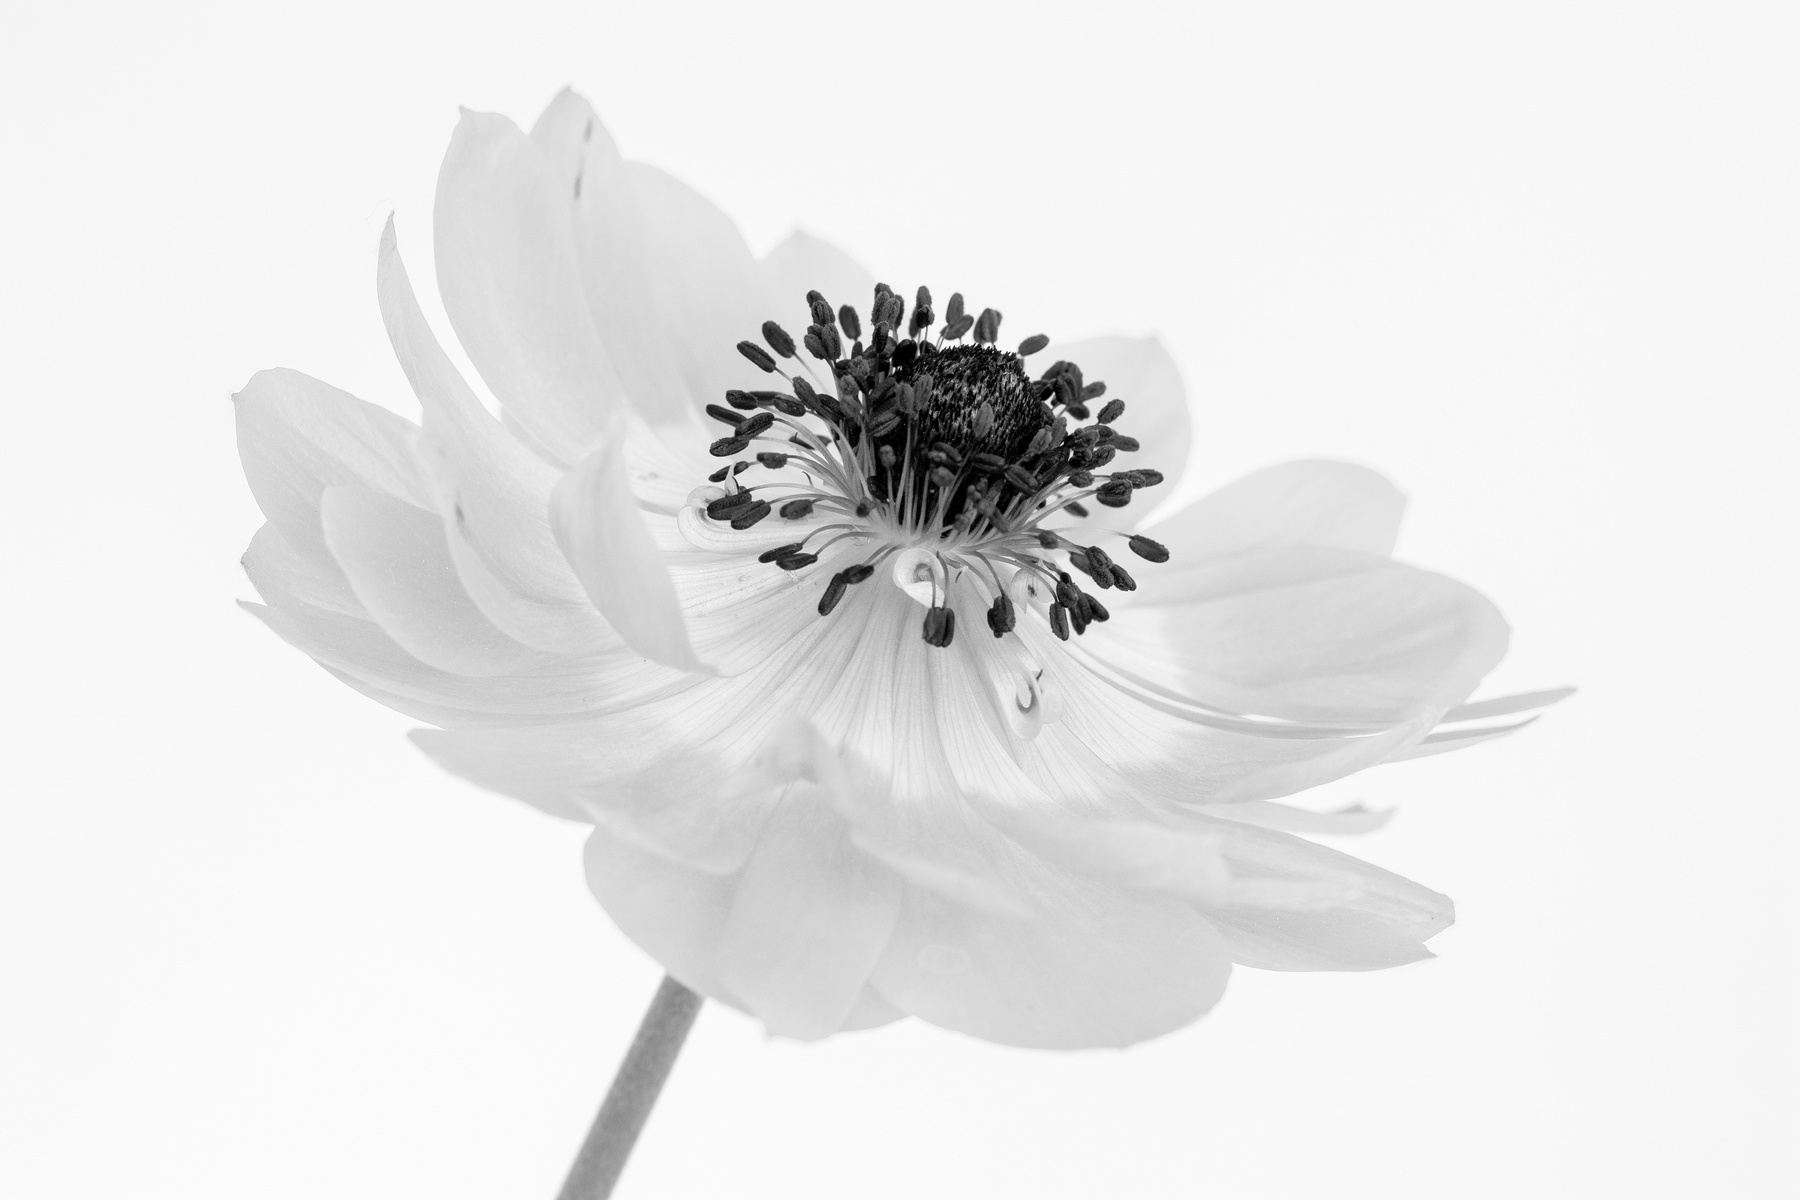 Black and White Image of Anemone Flower